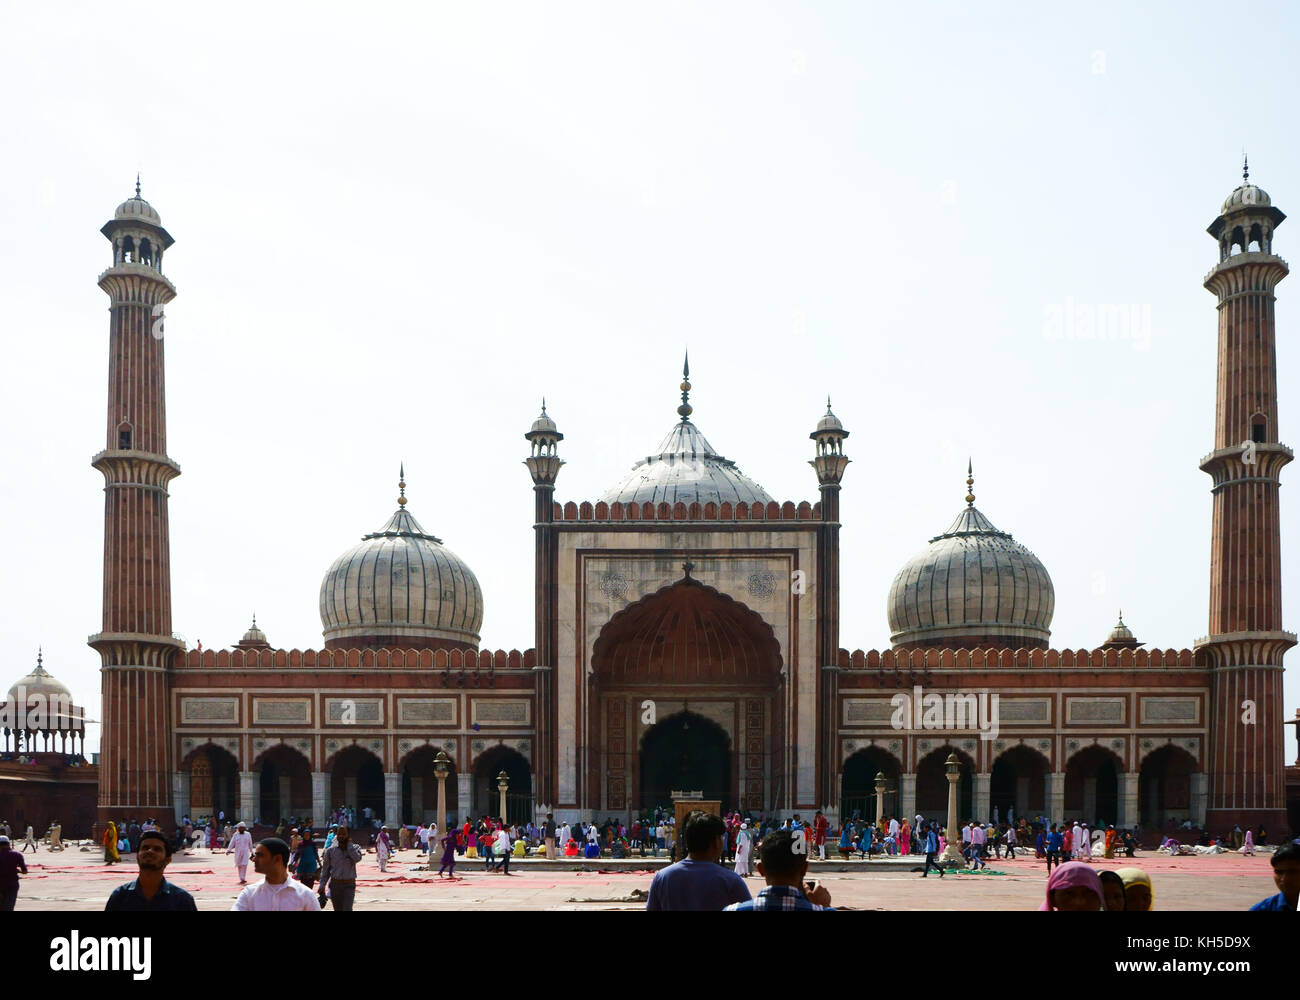 Muslims during Friday prayer in courtyard at Fatehpuri Masjid mosque in Old Delhi, India Stock Photo